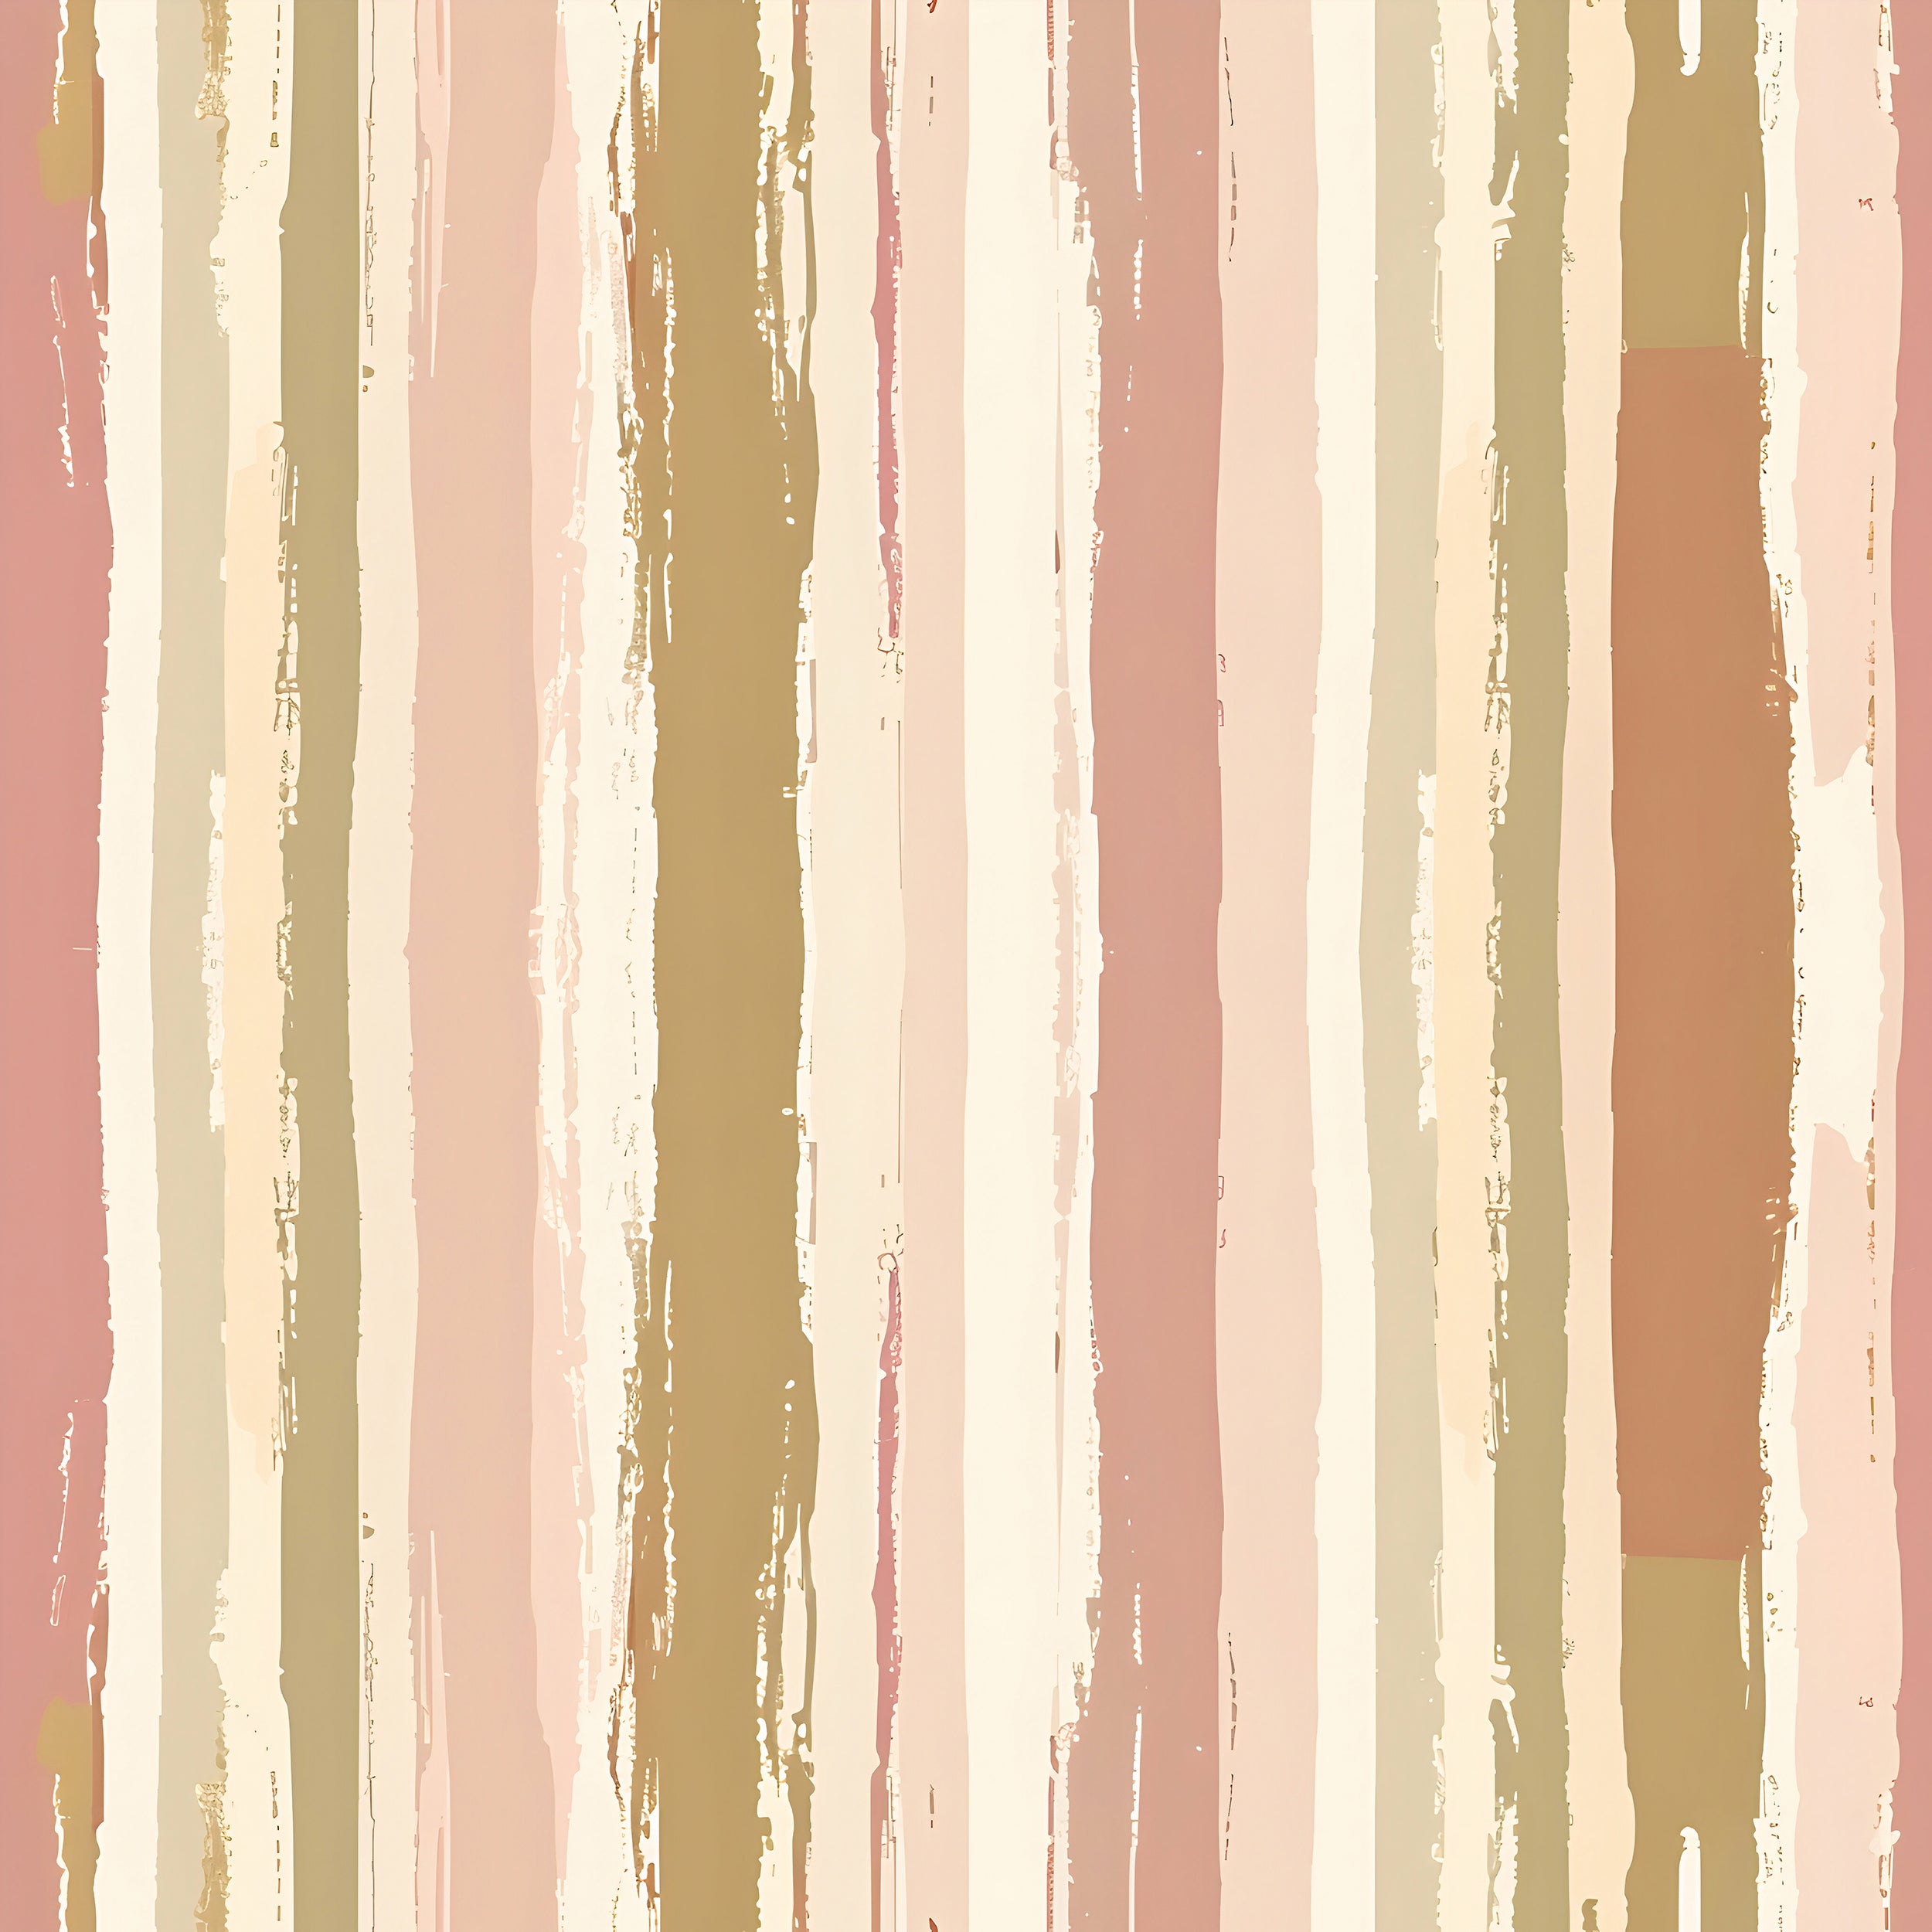 Peel and Stick Pastel Color Stripes Vinyl Wallpaper Soft Pink and Beige Striped Wall Mural